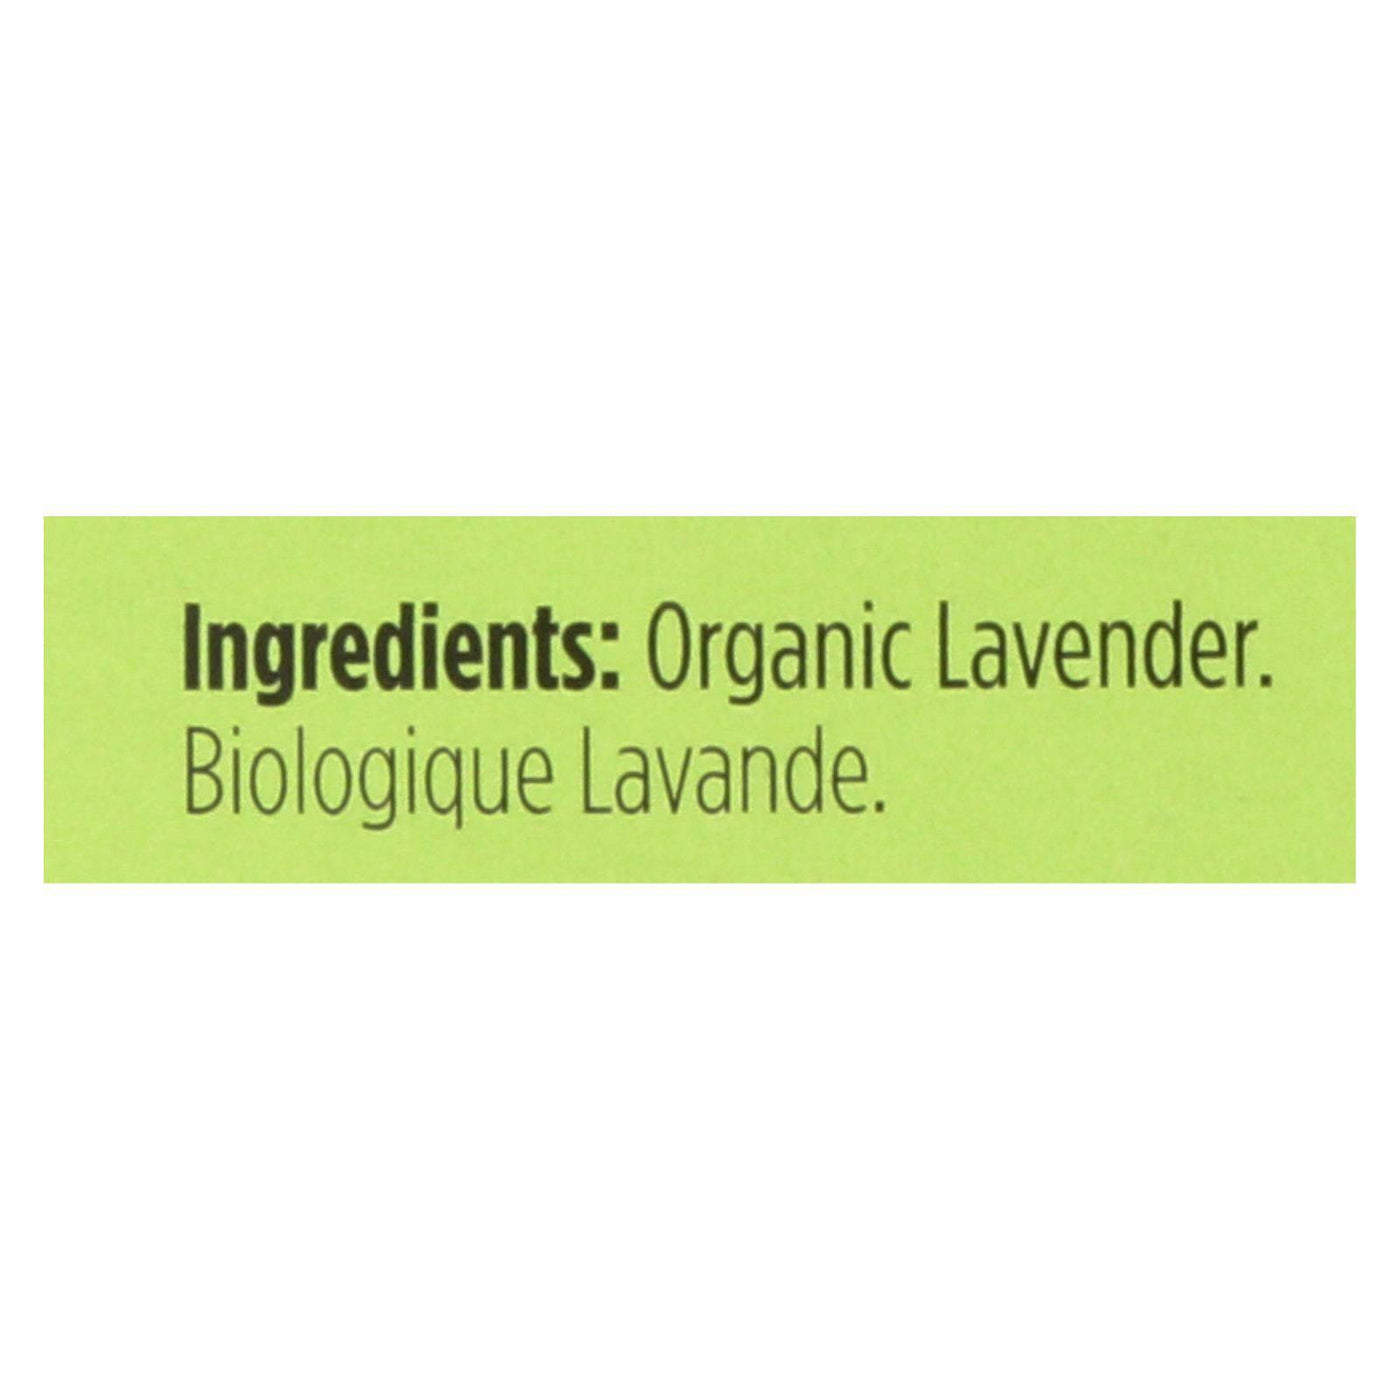 Buy Spicely Organics - Organic Lavender - Case Of 6 - 0.1 Oz.  at OnlyNaturals.us